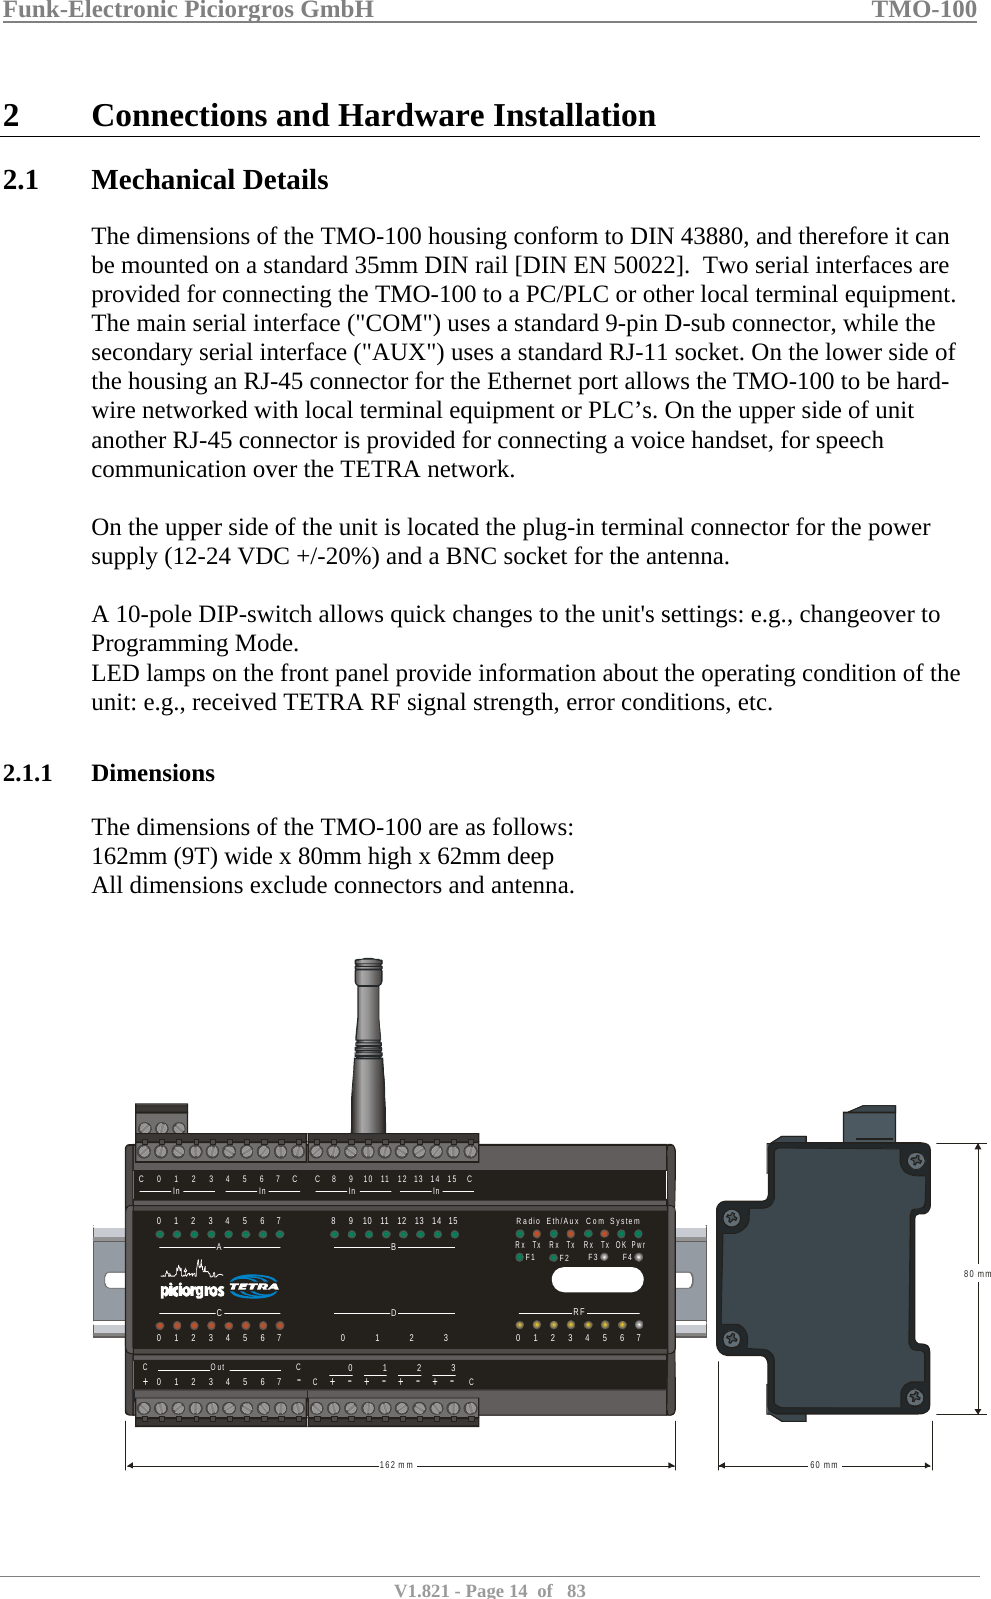 Funk-Electronic Piciorgros GmbH   TMO-100   V1.821 - Page 14  of   83   2 Connections and Hardware Installation 2.1 Mechanical Details The dimensions of the TMO-100 housing conform to DIN 43880, and therefore it can be mounted on a standard 35mm DIN rail [DIN EN 50022].  Two serial interfaces are provided for connecting the TMO-100 to a PC/PLC or other local terminal equipment. The main serial interface (&quot;COM&quot;) uses a standard 9-pin D-sub connector, while the secondary serial interface (&quot;AUX&quot;) uses a standard RJ-11 socket. On the lower side of the housing an RJ-45 connector for the Ethernet port allows the TMO-100 to be hard-wire networked with local terminal equipment or PLC’s. On the upper side of unit another RJ-45 connector is provided for connecting a voice handset, for speech communication over the TETRA network.   On the upper side of the unit is located the plug-in terminal connector for the power supply (12-24 VDC +/-20%) and a BNC socket for the antenna.   A 10-pole DIP-switch allows quick changes to the unit&apos;s settings: e.g., changeover to Programming Mode.  LED lamps on the front panel provide information about the operating condition of the unit: e.g., received TETRA RF signal strength, error conditions, etc.  2.1.1 Dimensions The dimensions of the TMO-100 are as follows: 162mm (9T) wide x 80mm high x 62mm deep All dimensions exclude connectors and antenna.      RFBDAC080123001911210223113341244513556146671577CCOut CC+++++-----012301234567CC0819210311412513614In InIn In715CC80 mm60 mm162 mmRadioRx Rx RxTx Tx Tx OK PwrEth/Aux SystemComF1 F2 F4F3